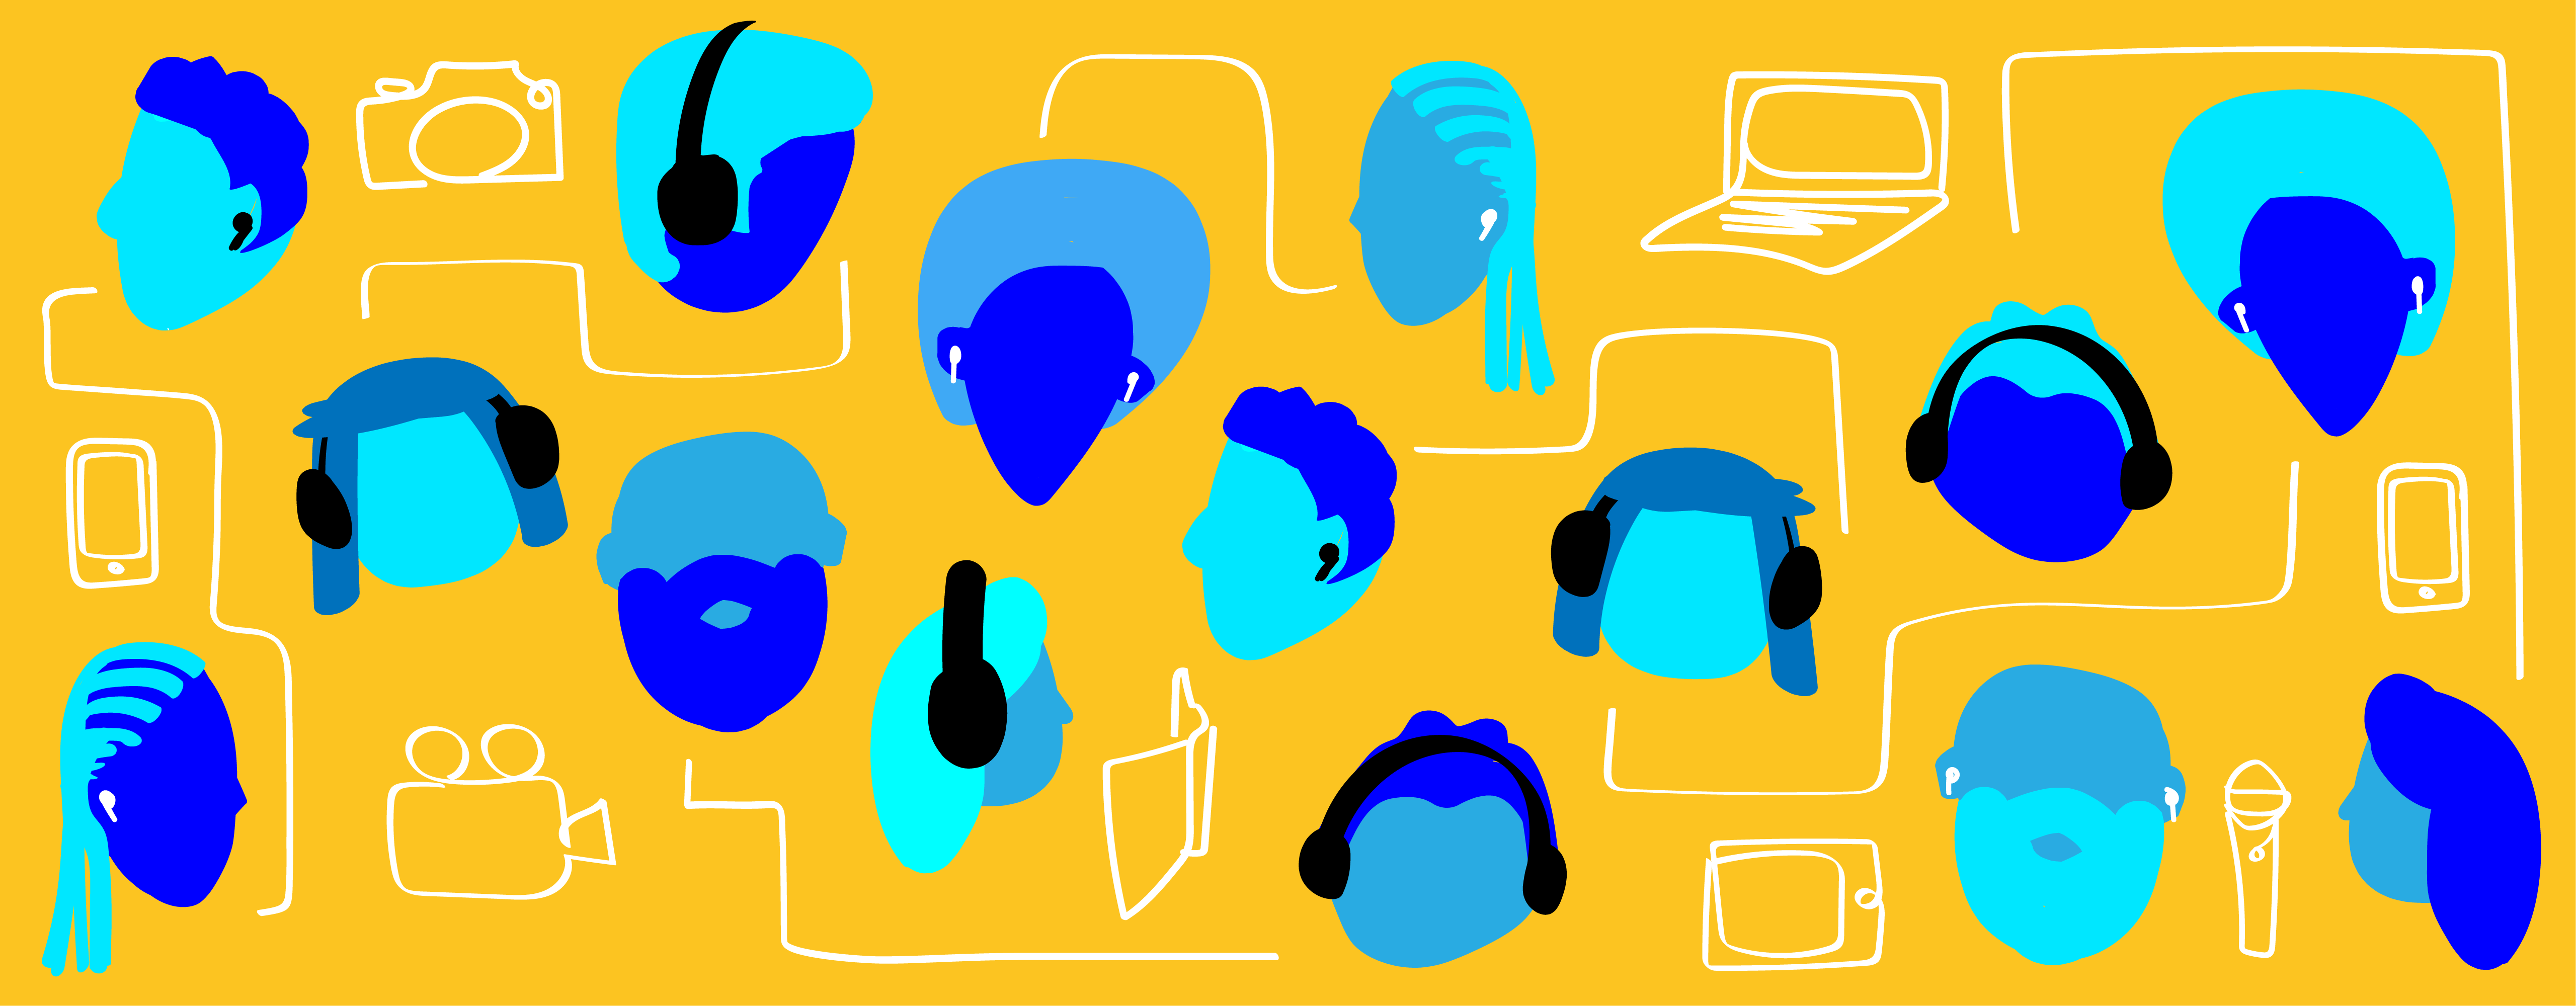 Graphic showing heads, some wearing headphones, and various devices such as phones, computers, and tablets